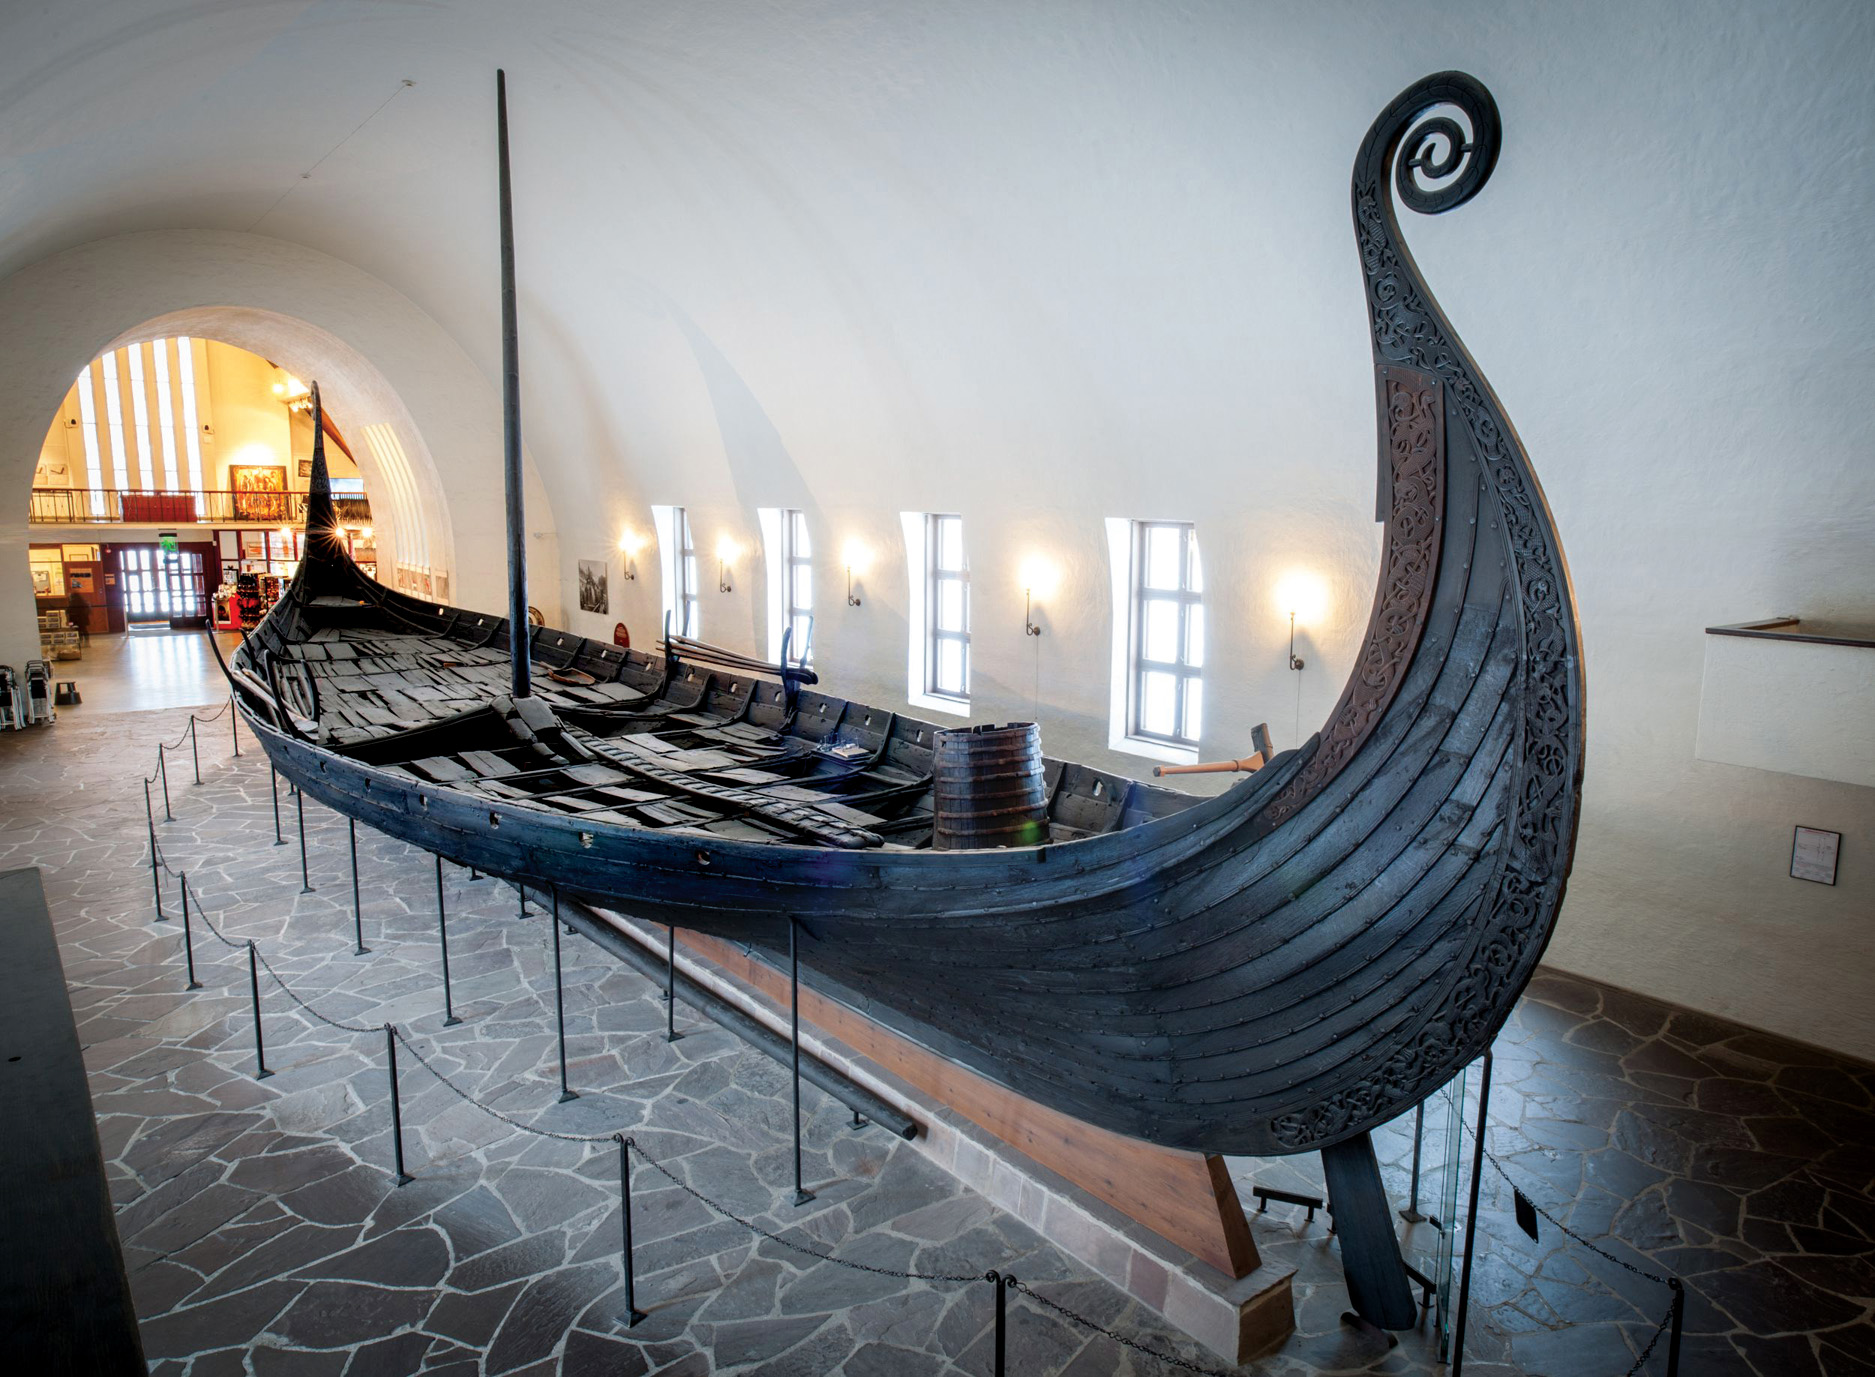 The 9th-century Oseberg ship in the Viking Ship Museum in Oslo was excavated in the early 20th century from a burial mound in southern Norway. The karve-style, clinker-built ship with its broad hull is made almost entirely from oak.